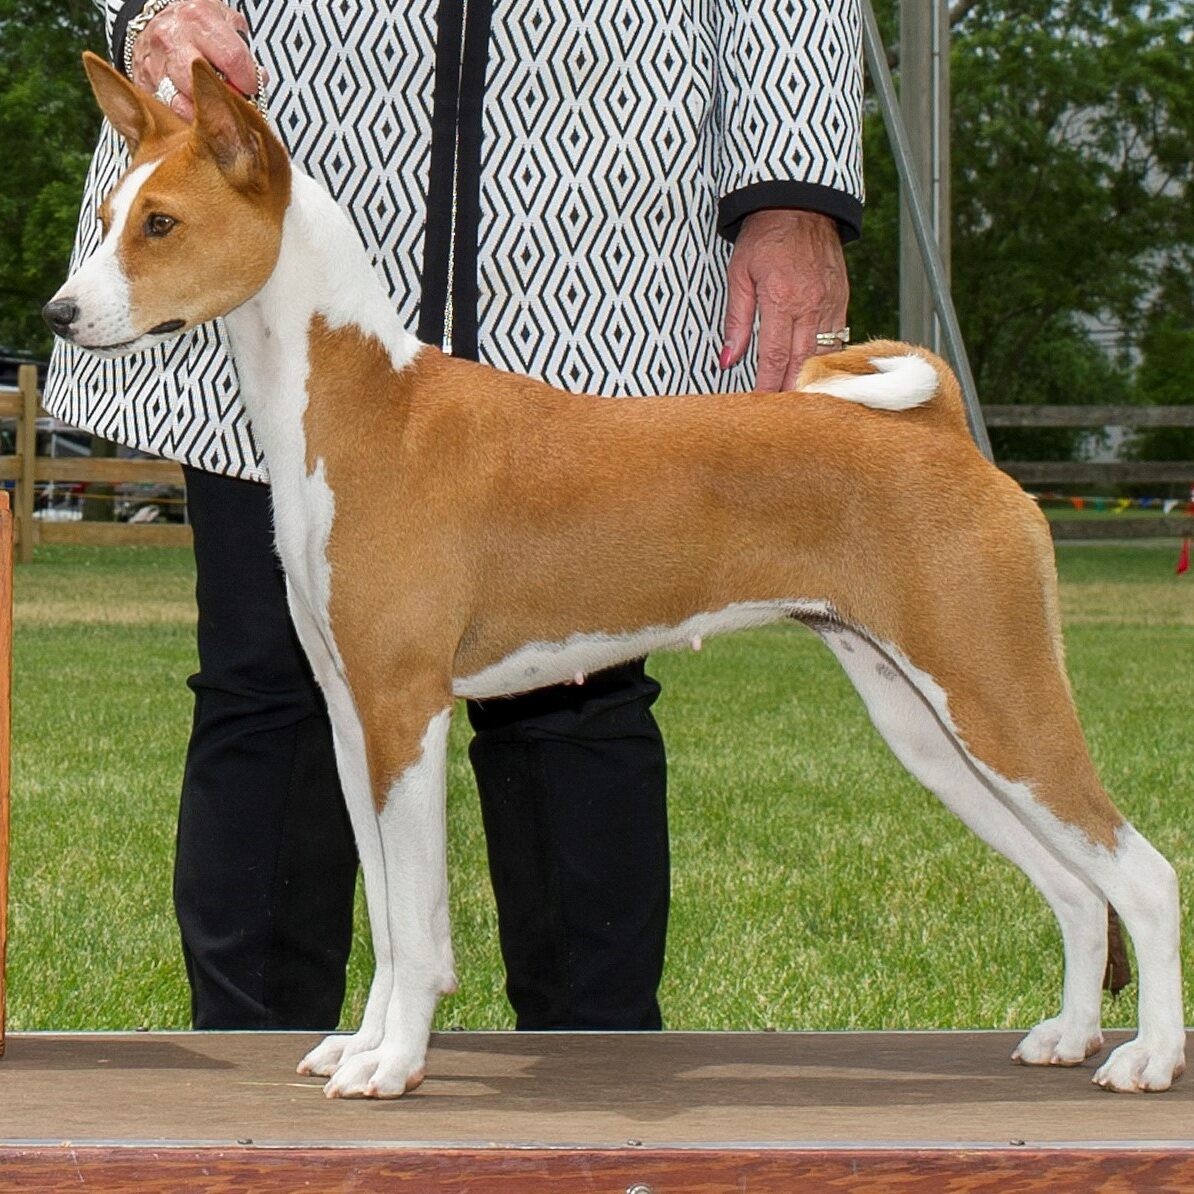 Best of Breed Close up Dayo 5.31.2021 Freehold